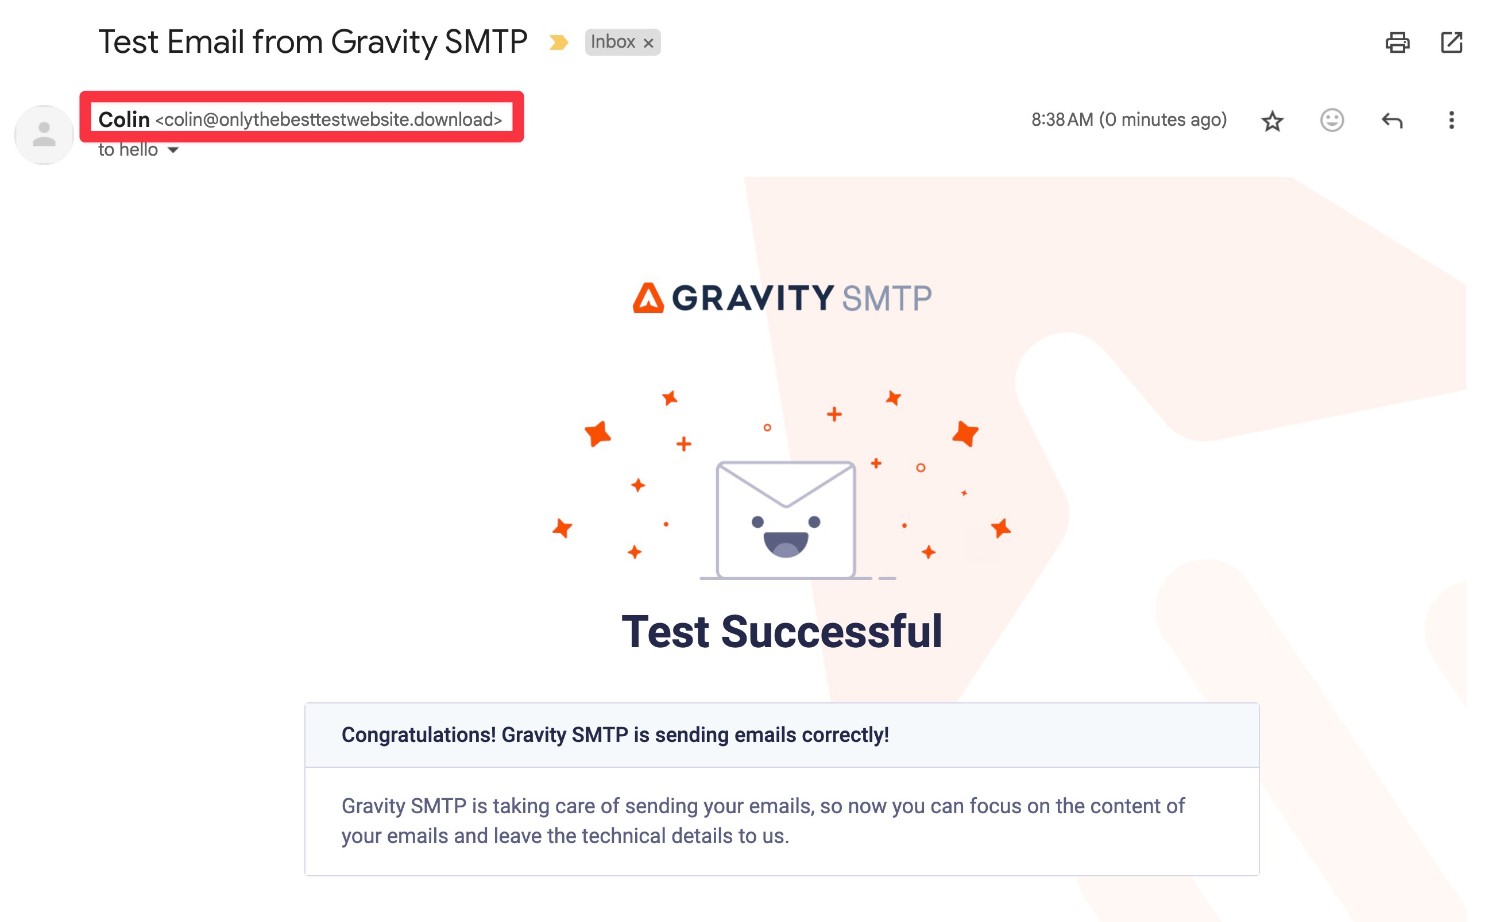 An example of the Gravity SMTP test email